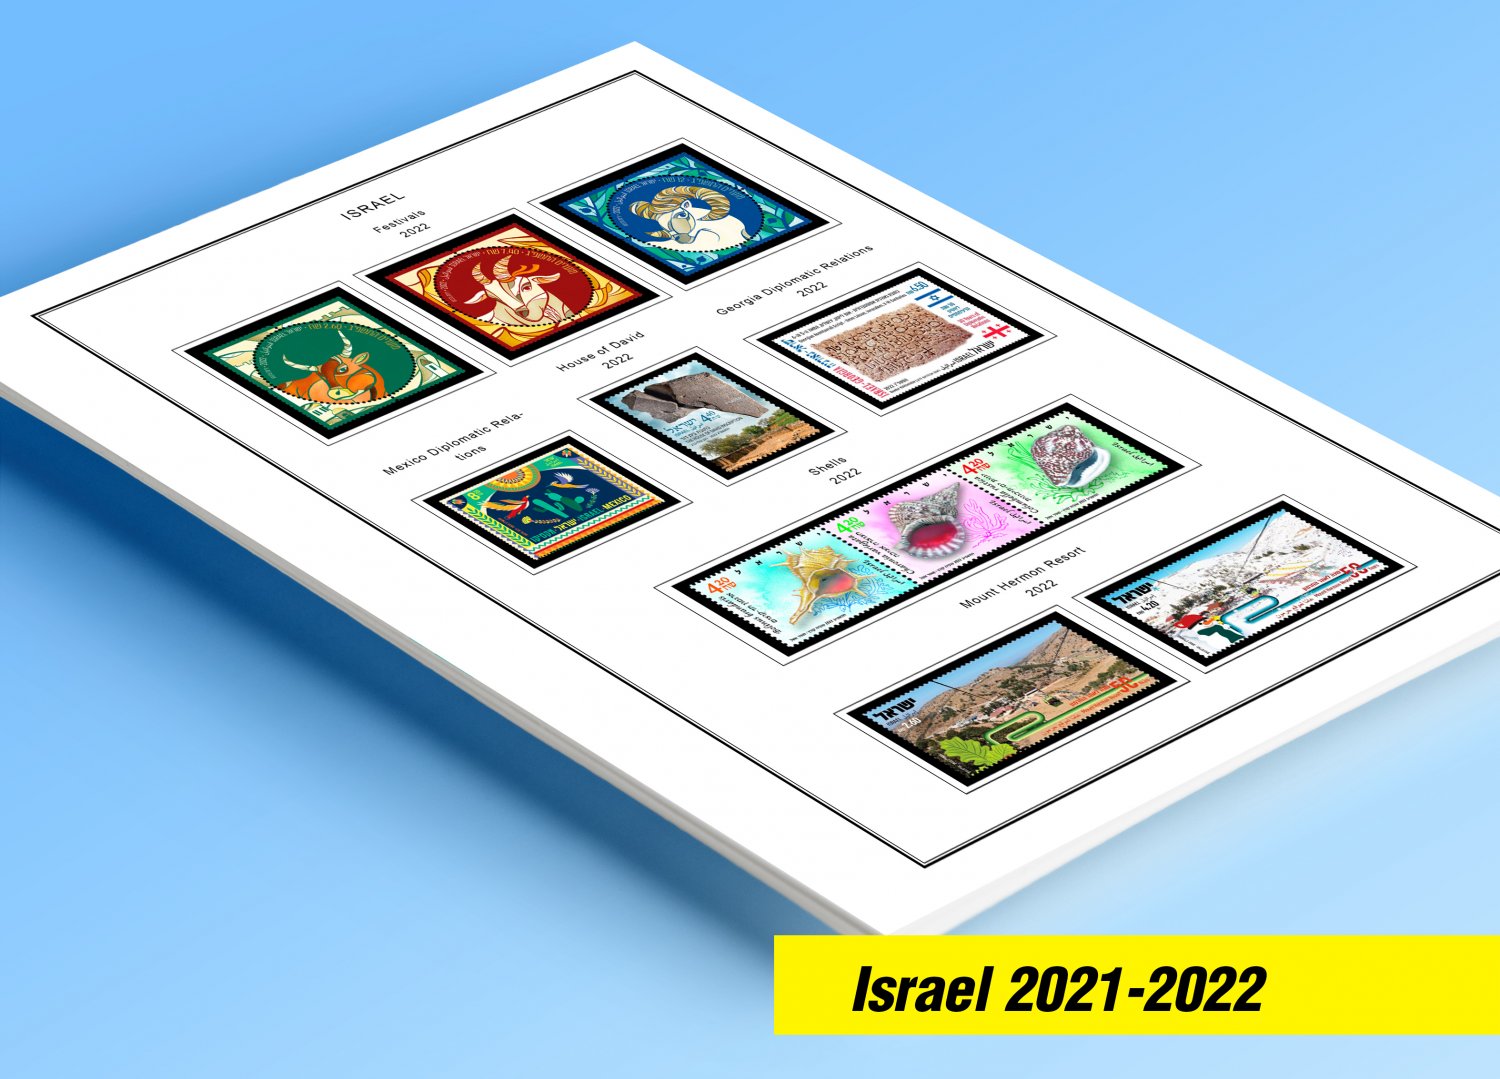 COLOR PRINTED ISRAEL 2021-2022 STAMP ALBUM PAGES (8 illustrated pages)